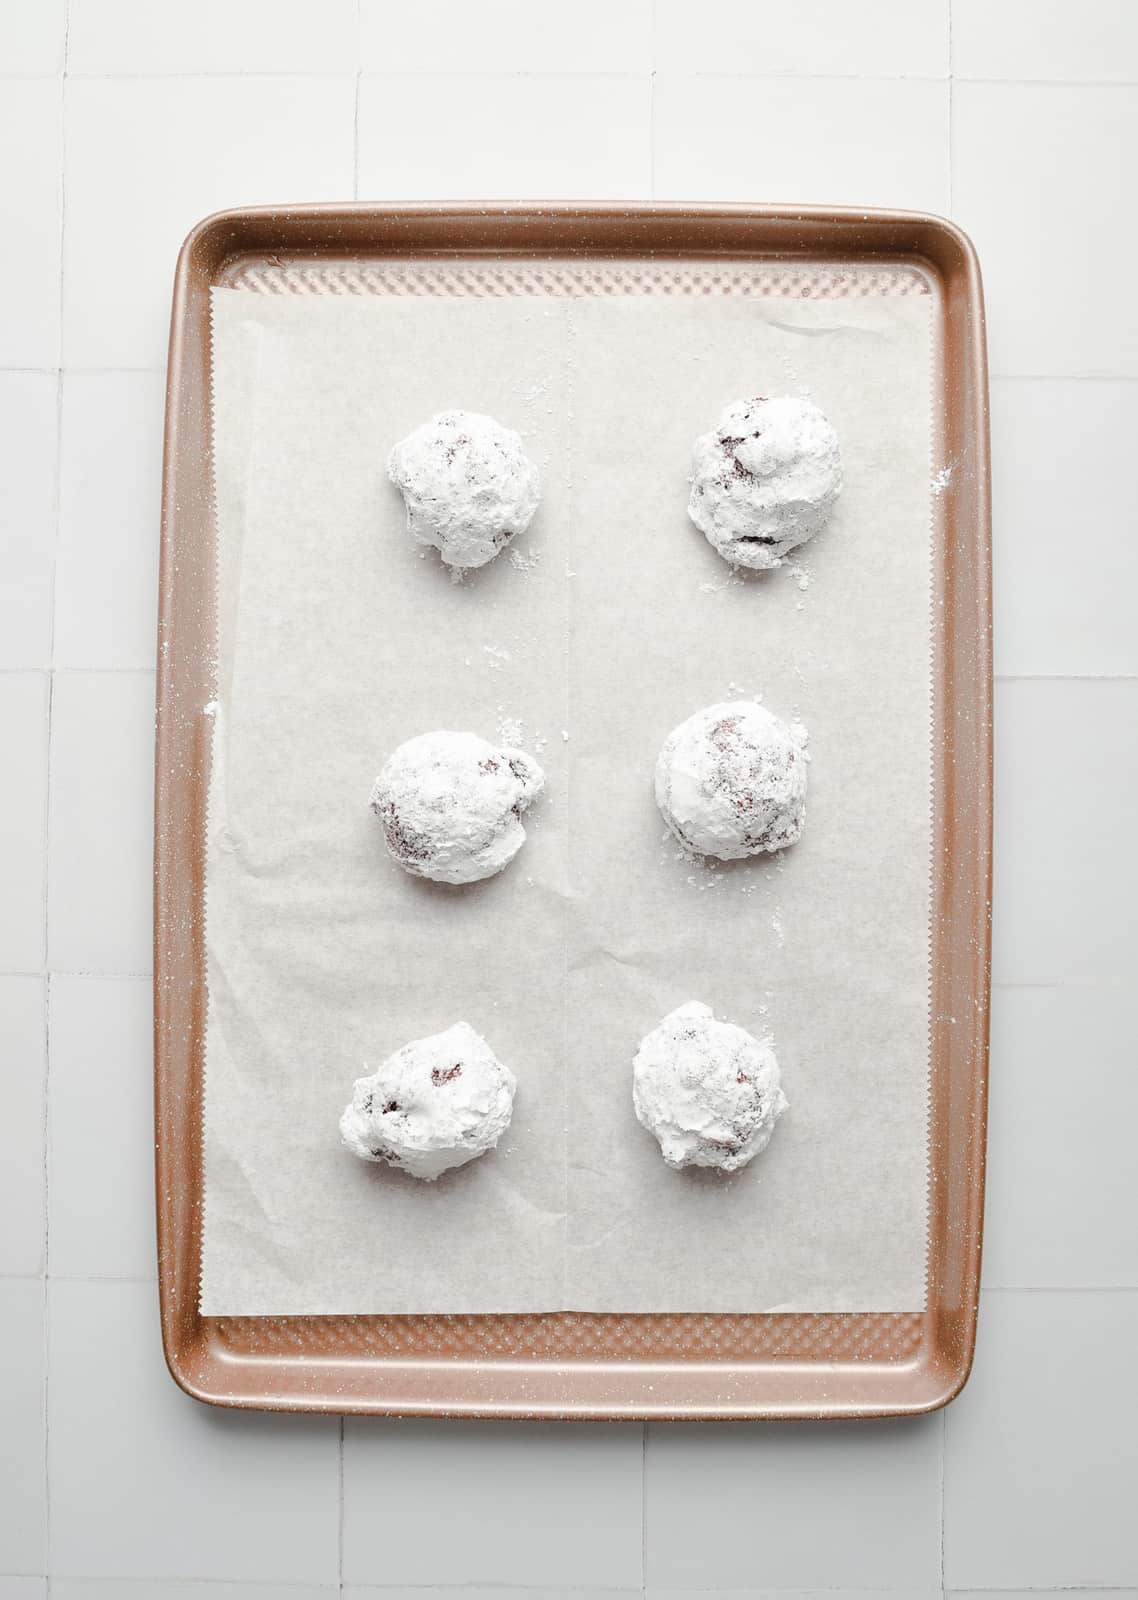 Cookie dough balls rolled in granulated and powdered sugar and placed on baking sheet.